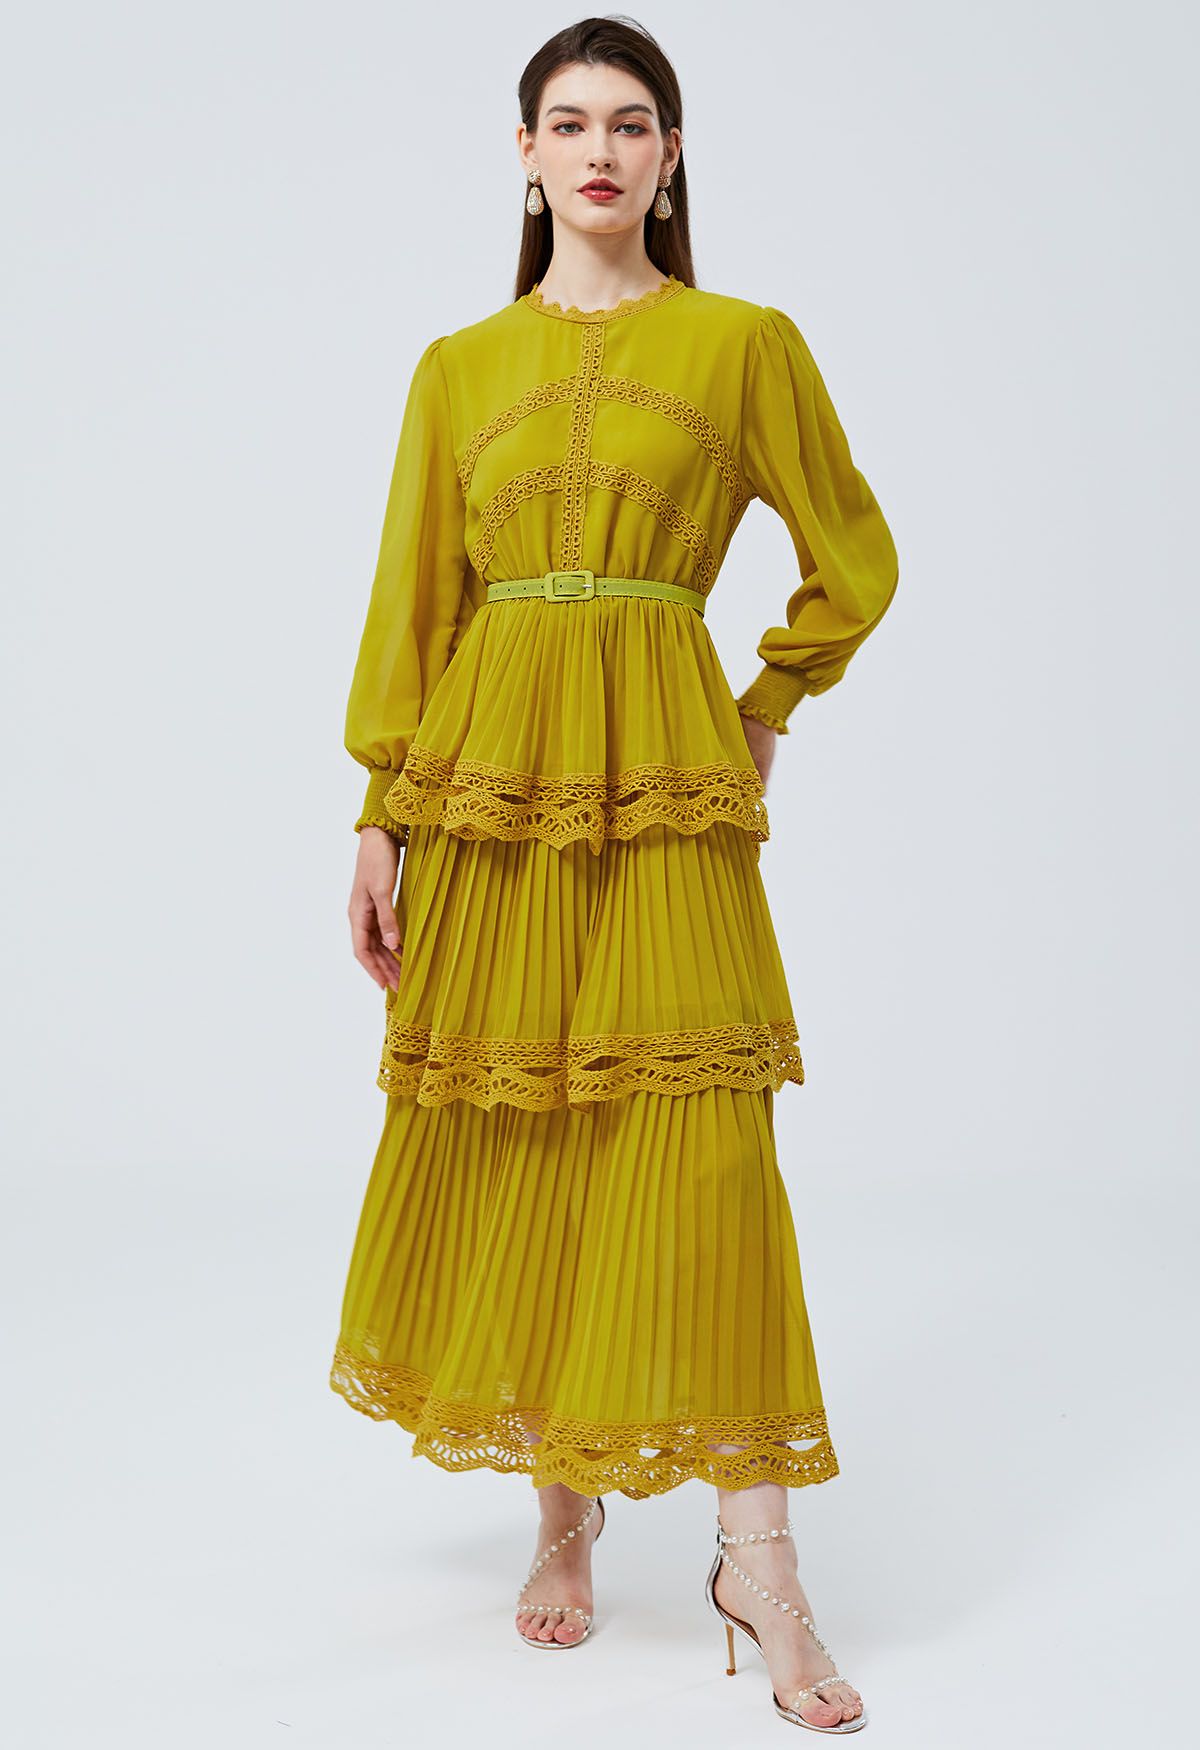 Crochet Lace Pleated Tiered Chiffon Maxi Dress in Yellow - Retro, Indie ...